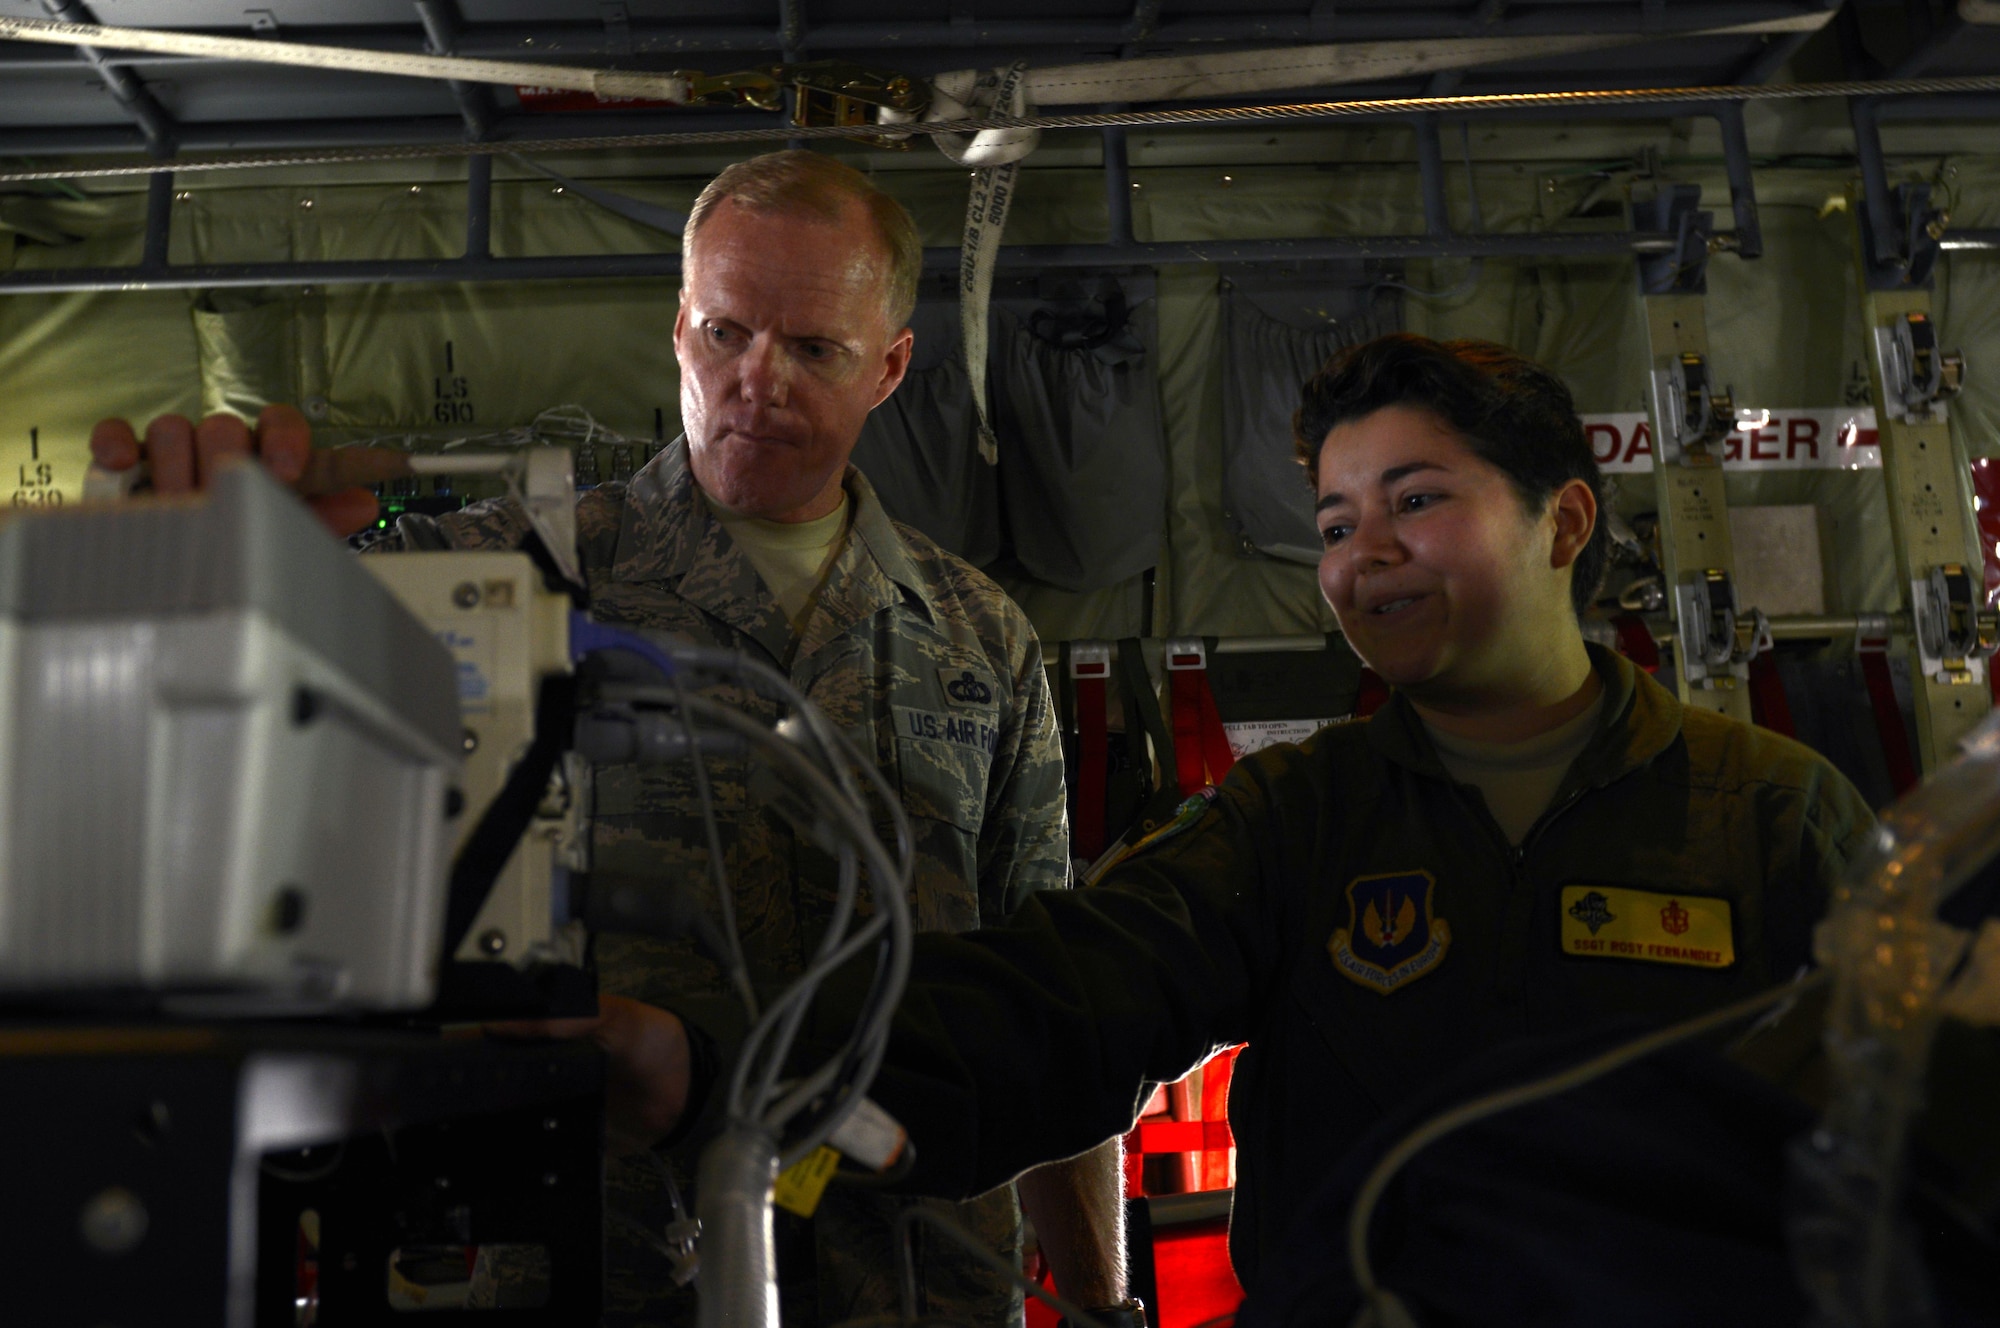 Staff Sgt. Rosy Fernandez, an 86th Medical Group respiratory therapist, demonstrates to Chief Master Sergeant of the Air Force James A. Cody how an injured military member receives care during an air rescue operation June 15, 2015, at Ramstein Air Base, Germany. During his visit, Cody held an all call for Airmen, spoke to senior NCOs and had a tour of Ramstein. (U.S. Air Force photo/Airman 1st Class Tryphena Mayhugh)